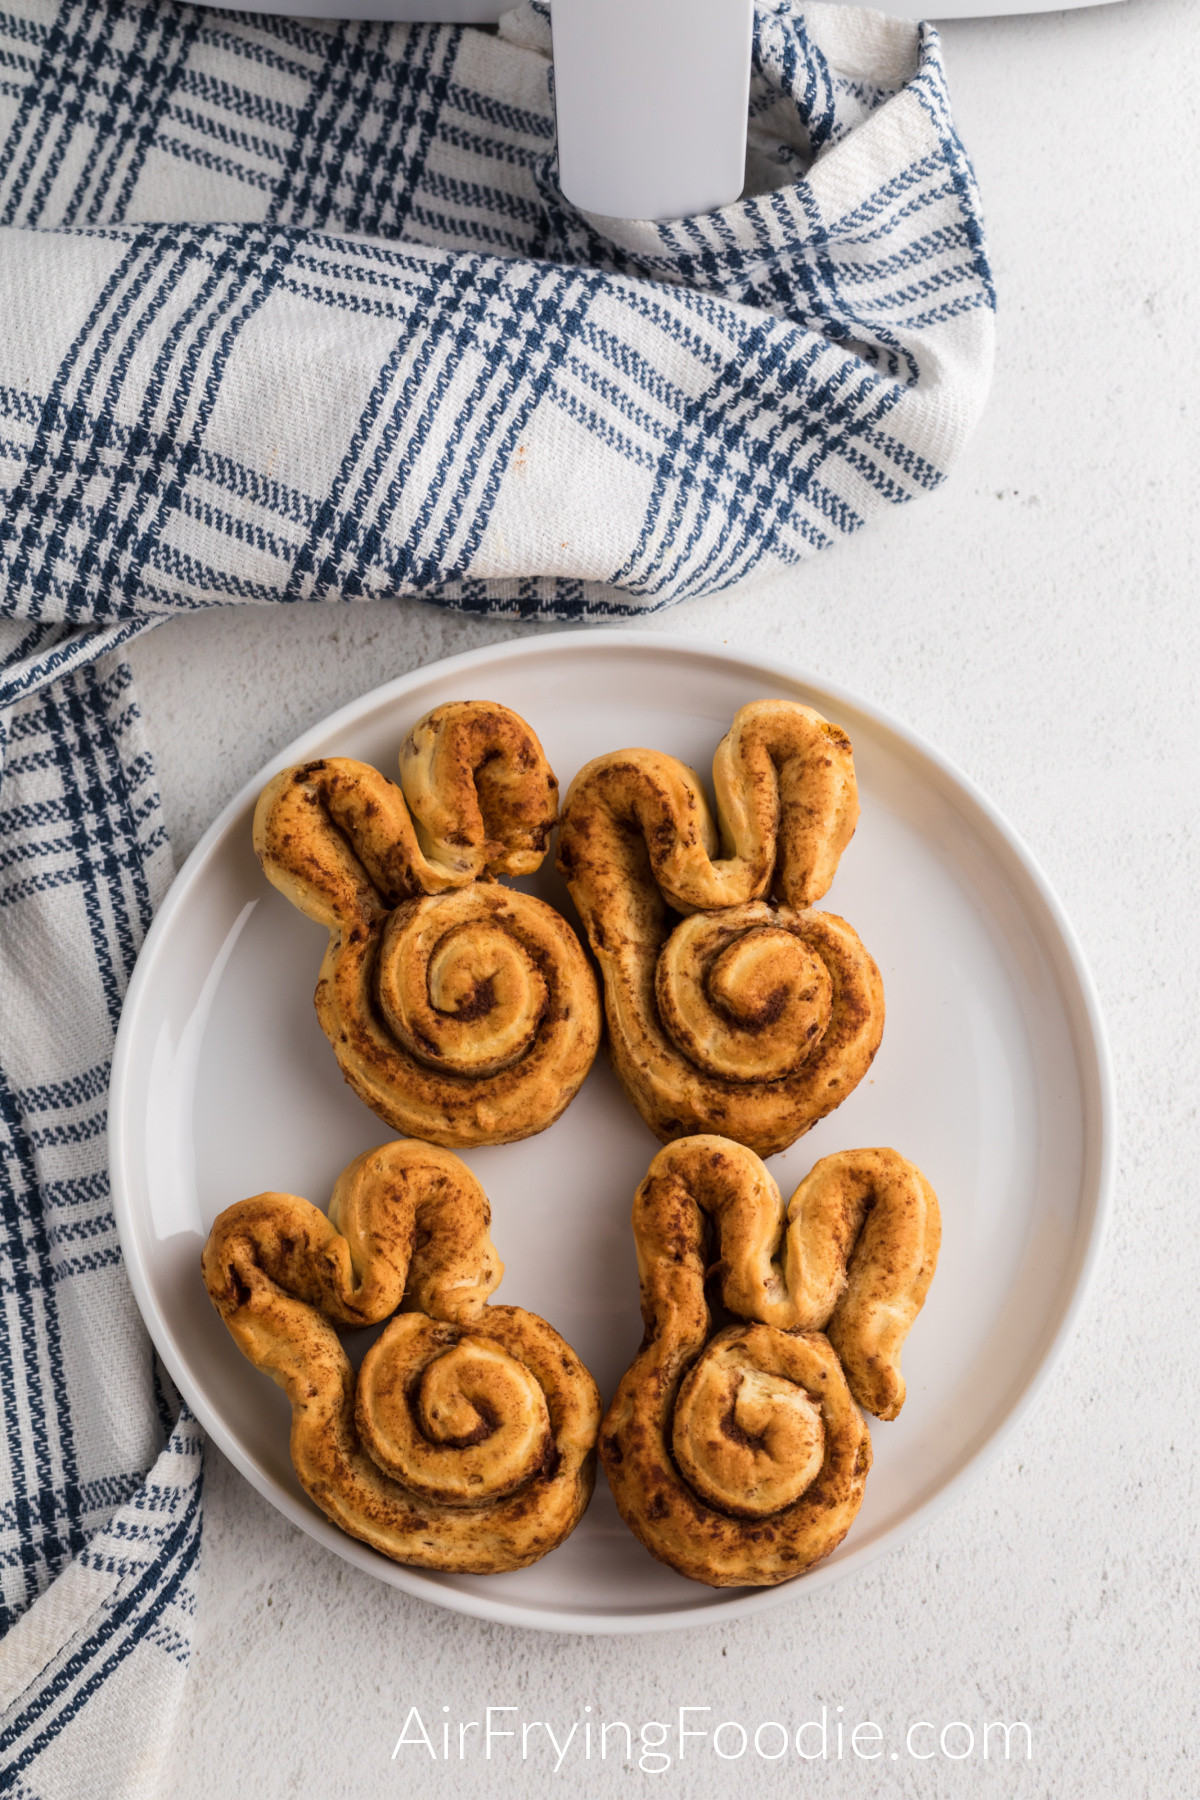 Cinnamon roll bunnies made in the air fryer and served on a white plate, ready to have glaze or frosting added.